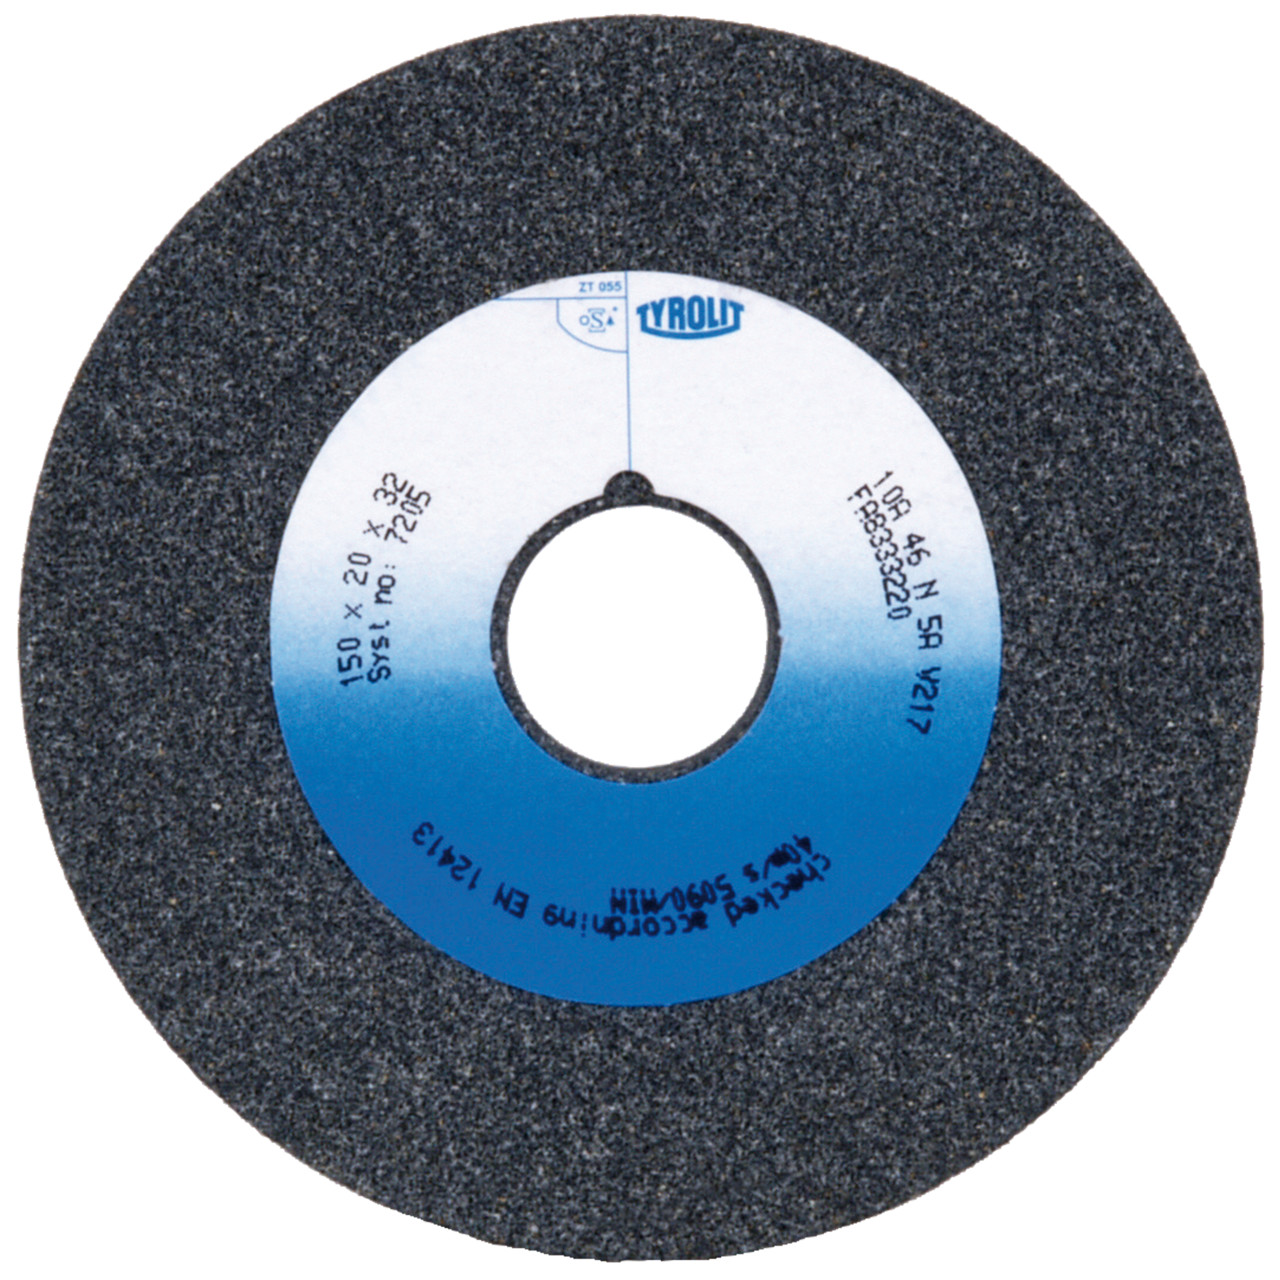 Tyrolit Conventional ceramic grinding discs DxDxH 200x32x51 For unalloyed and low-alloy steels, shape: 1, Art. 675264